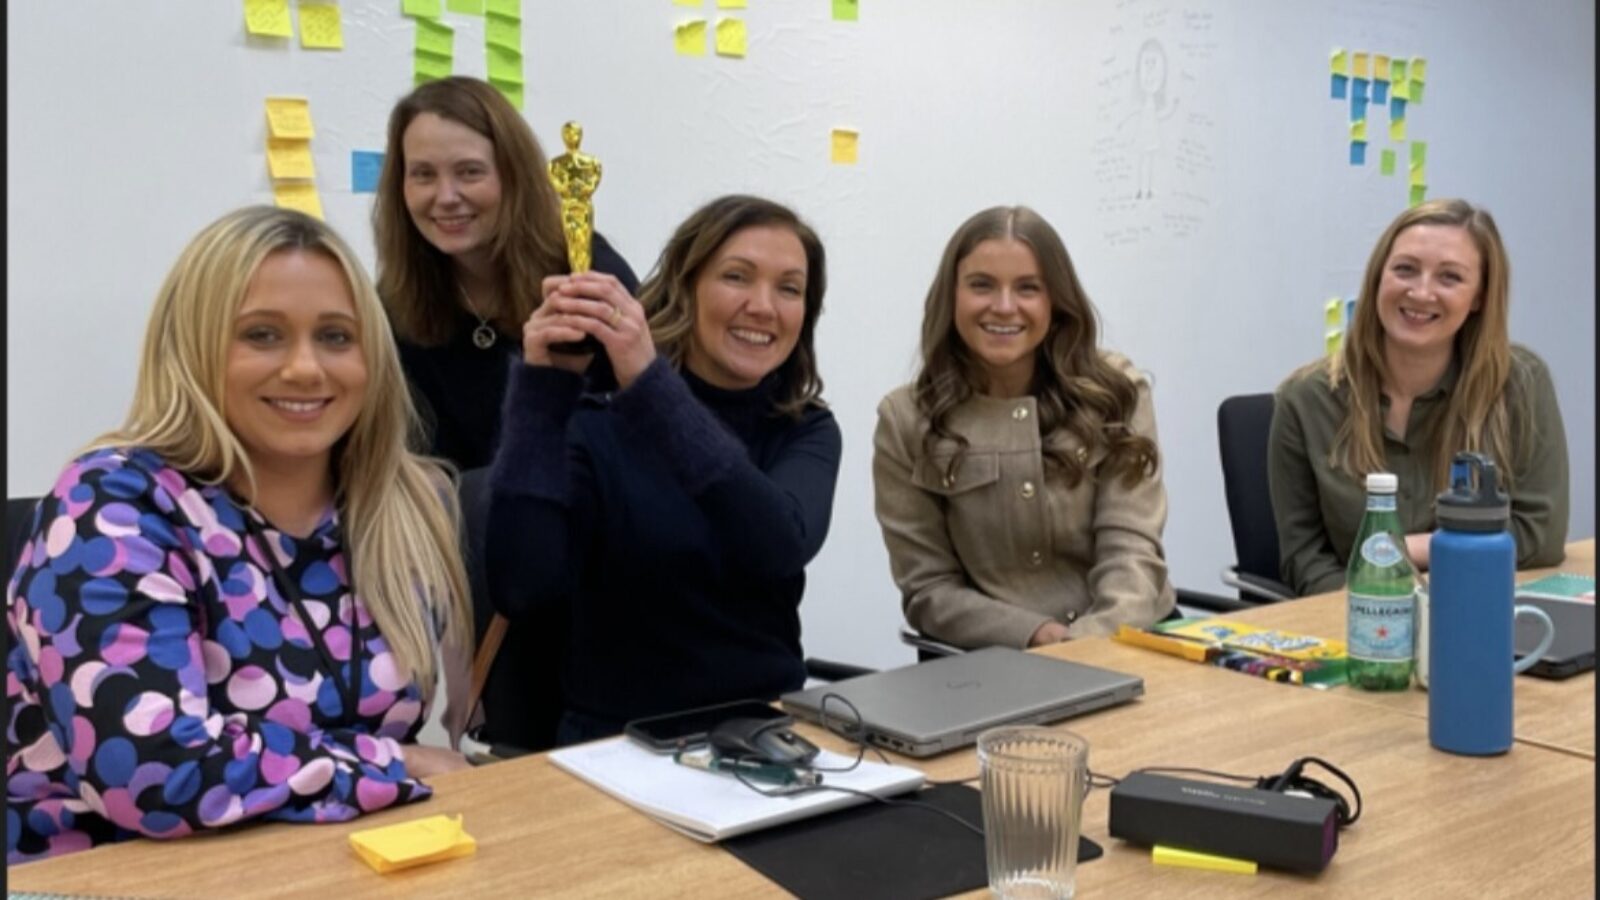 Aberdeen-based HR consultancy aligns values and objectives through bespoke workshops